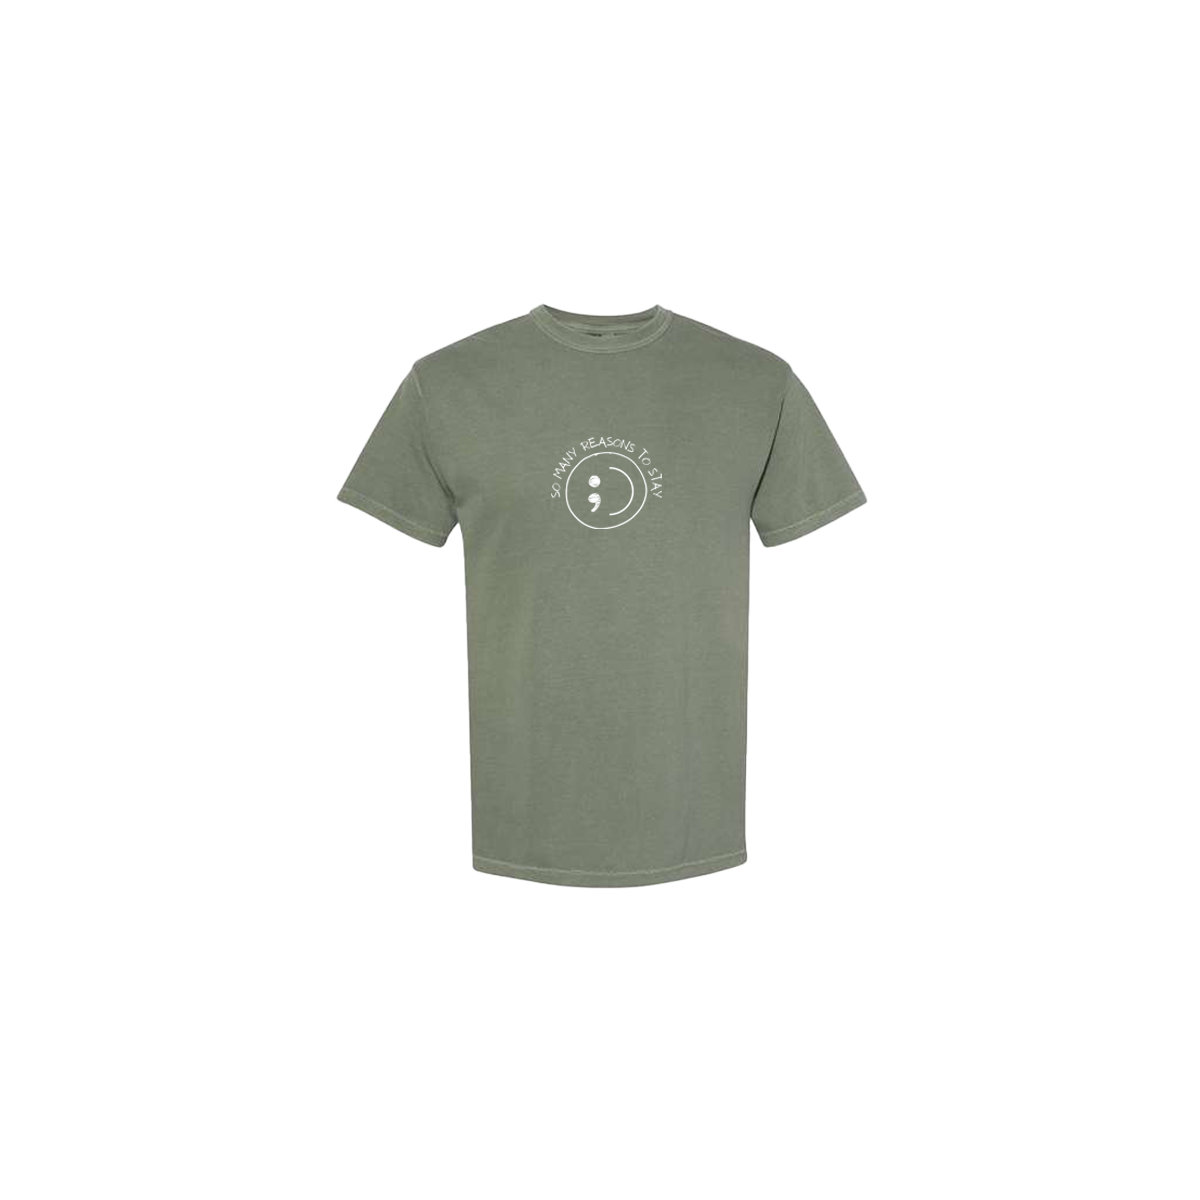 So Many Reasons to Stay Embroidered Army Green Tshirt - Mental Health Awareness Clothing